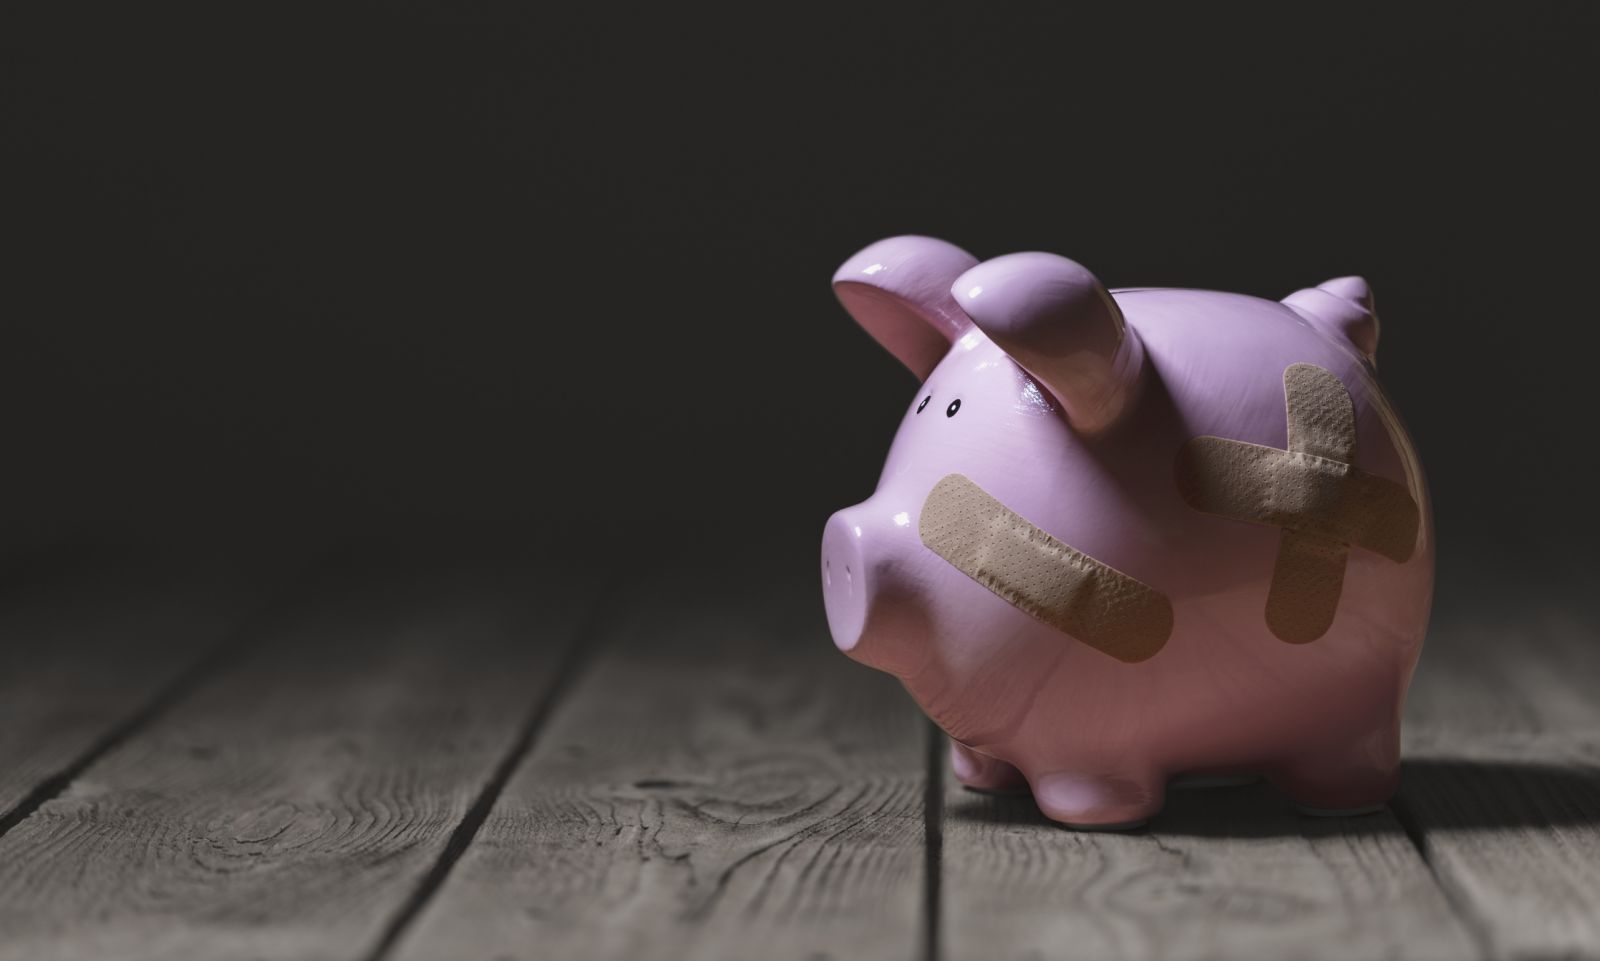 Piggy bank patched up with sticking plasters banner image